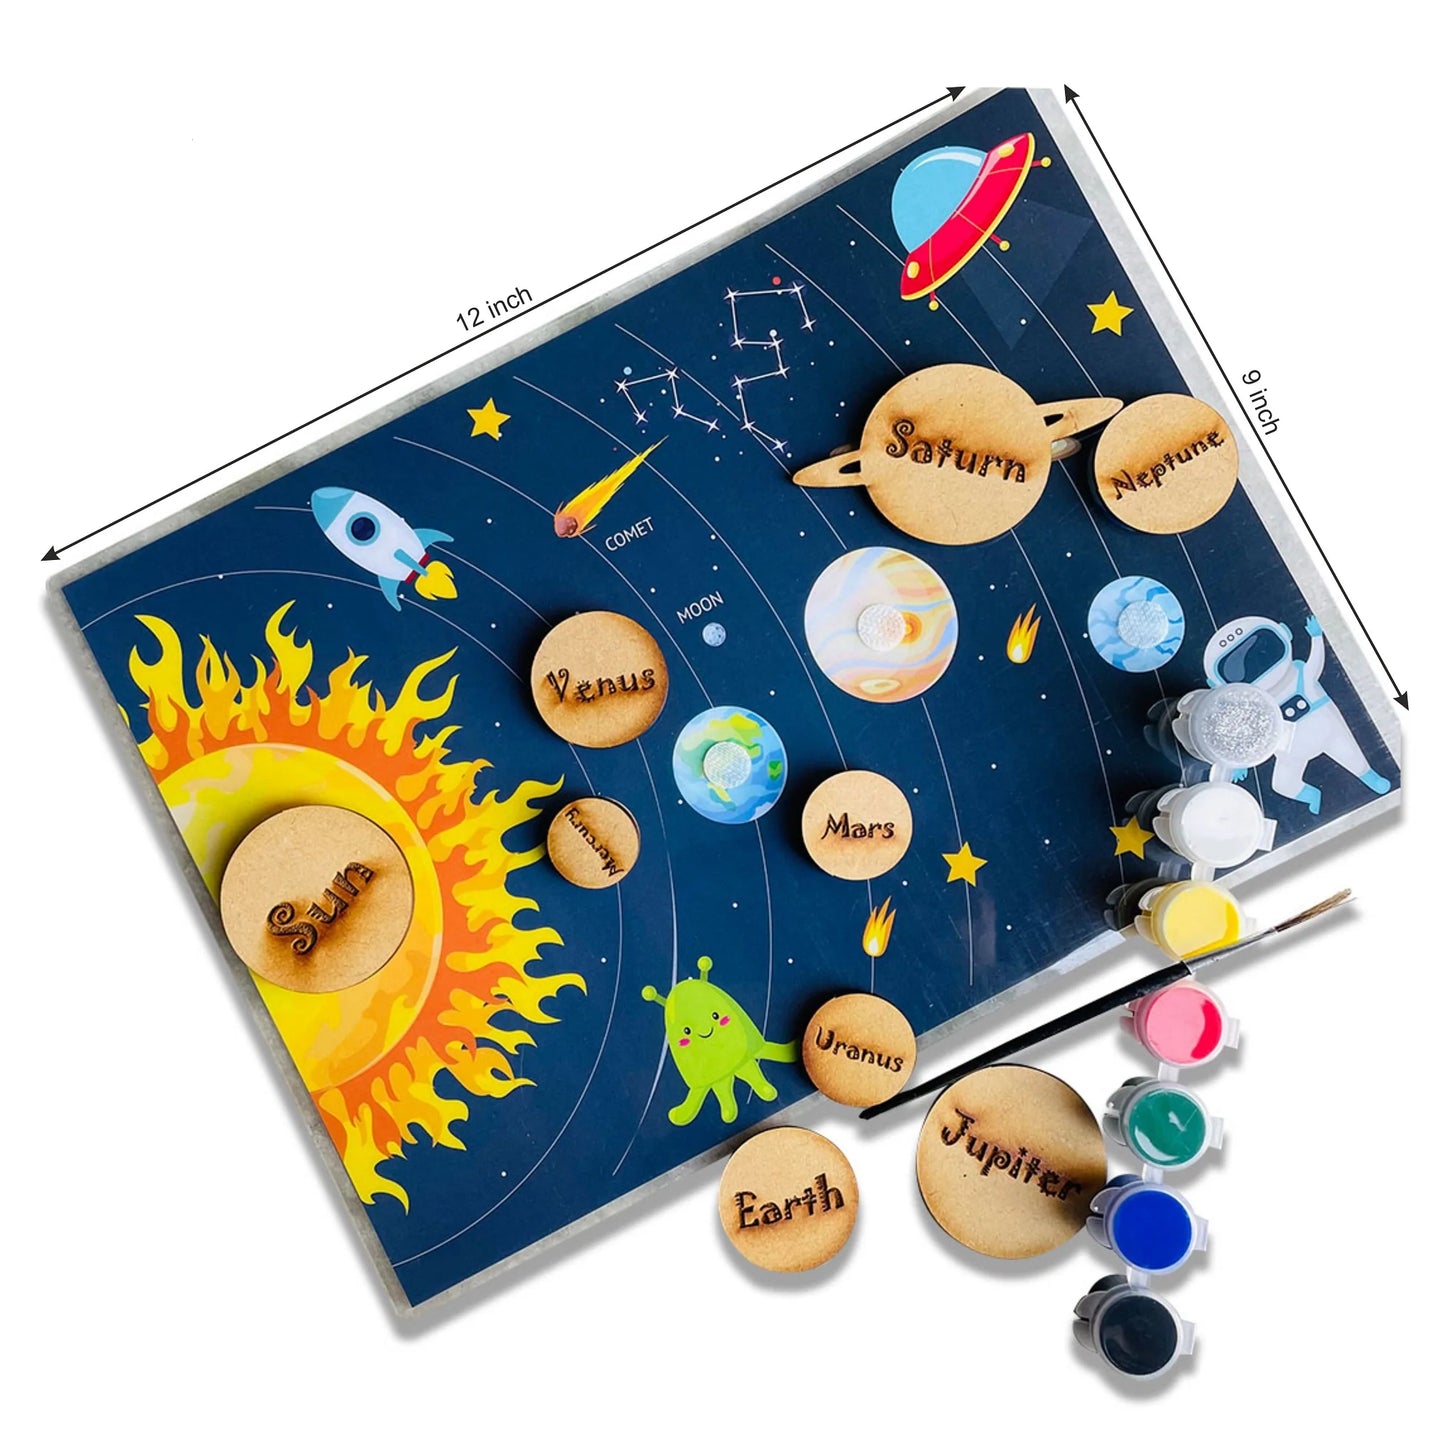 Buy Solar System Flashcard with Space Board Activity (Contain Wooden Planets) - Deminsion - SkilloToys.com